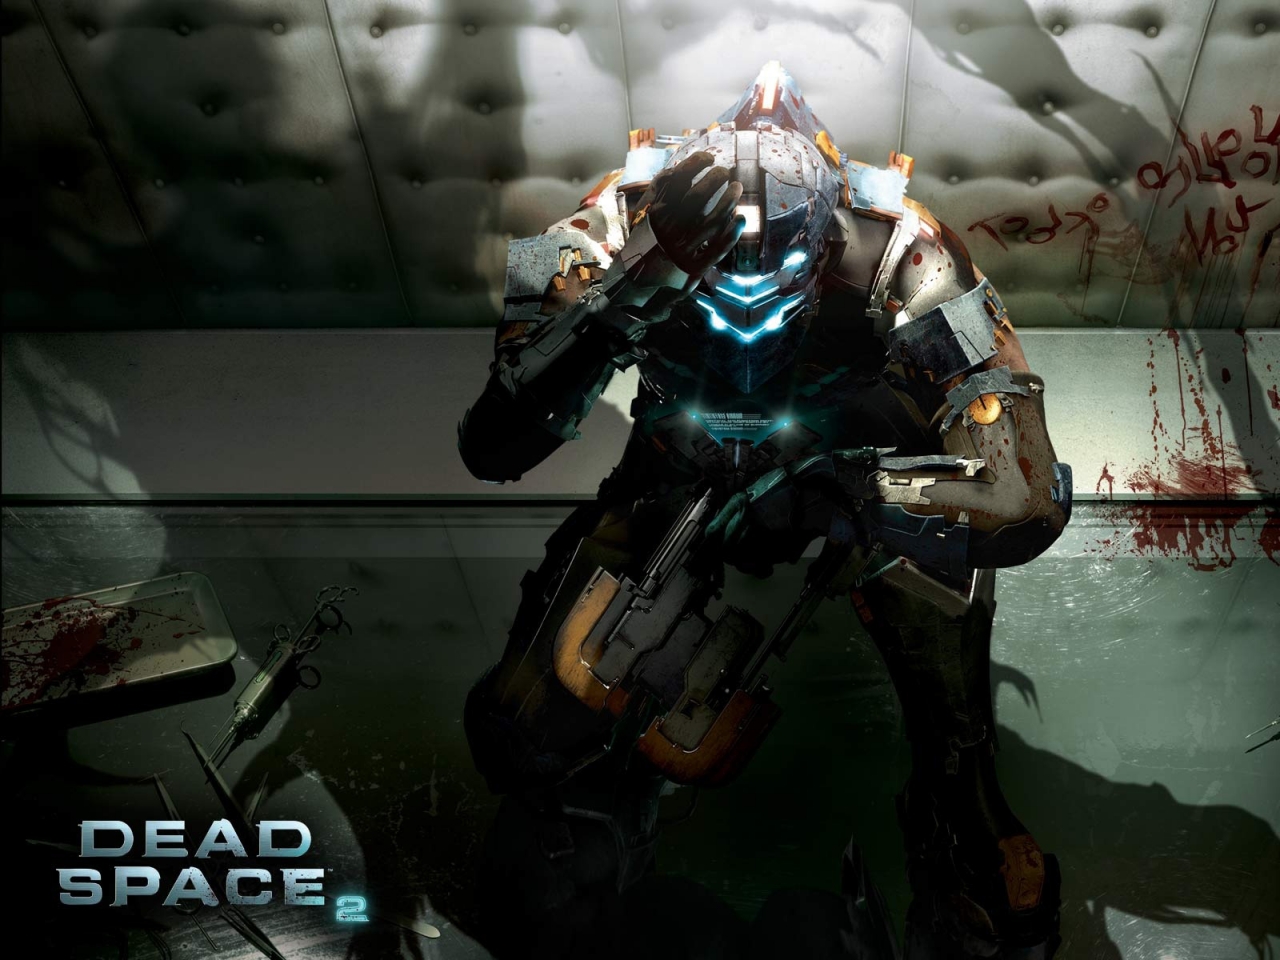 Dead Space 2 Character for 1280 x 960 resolution